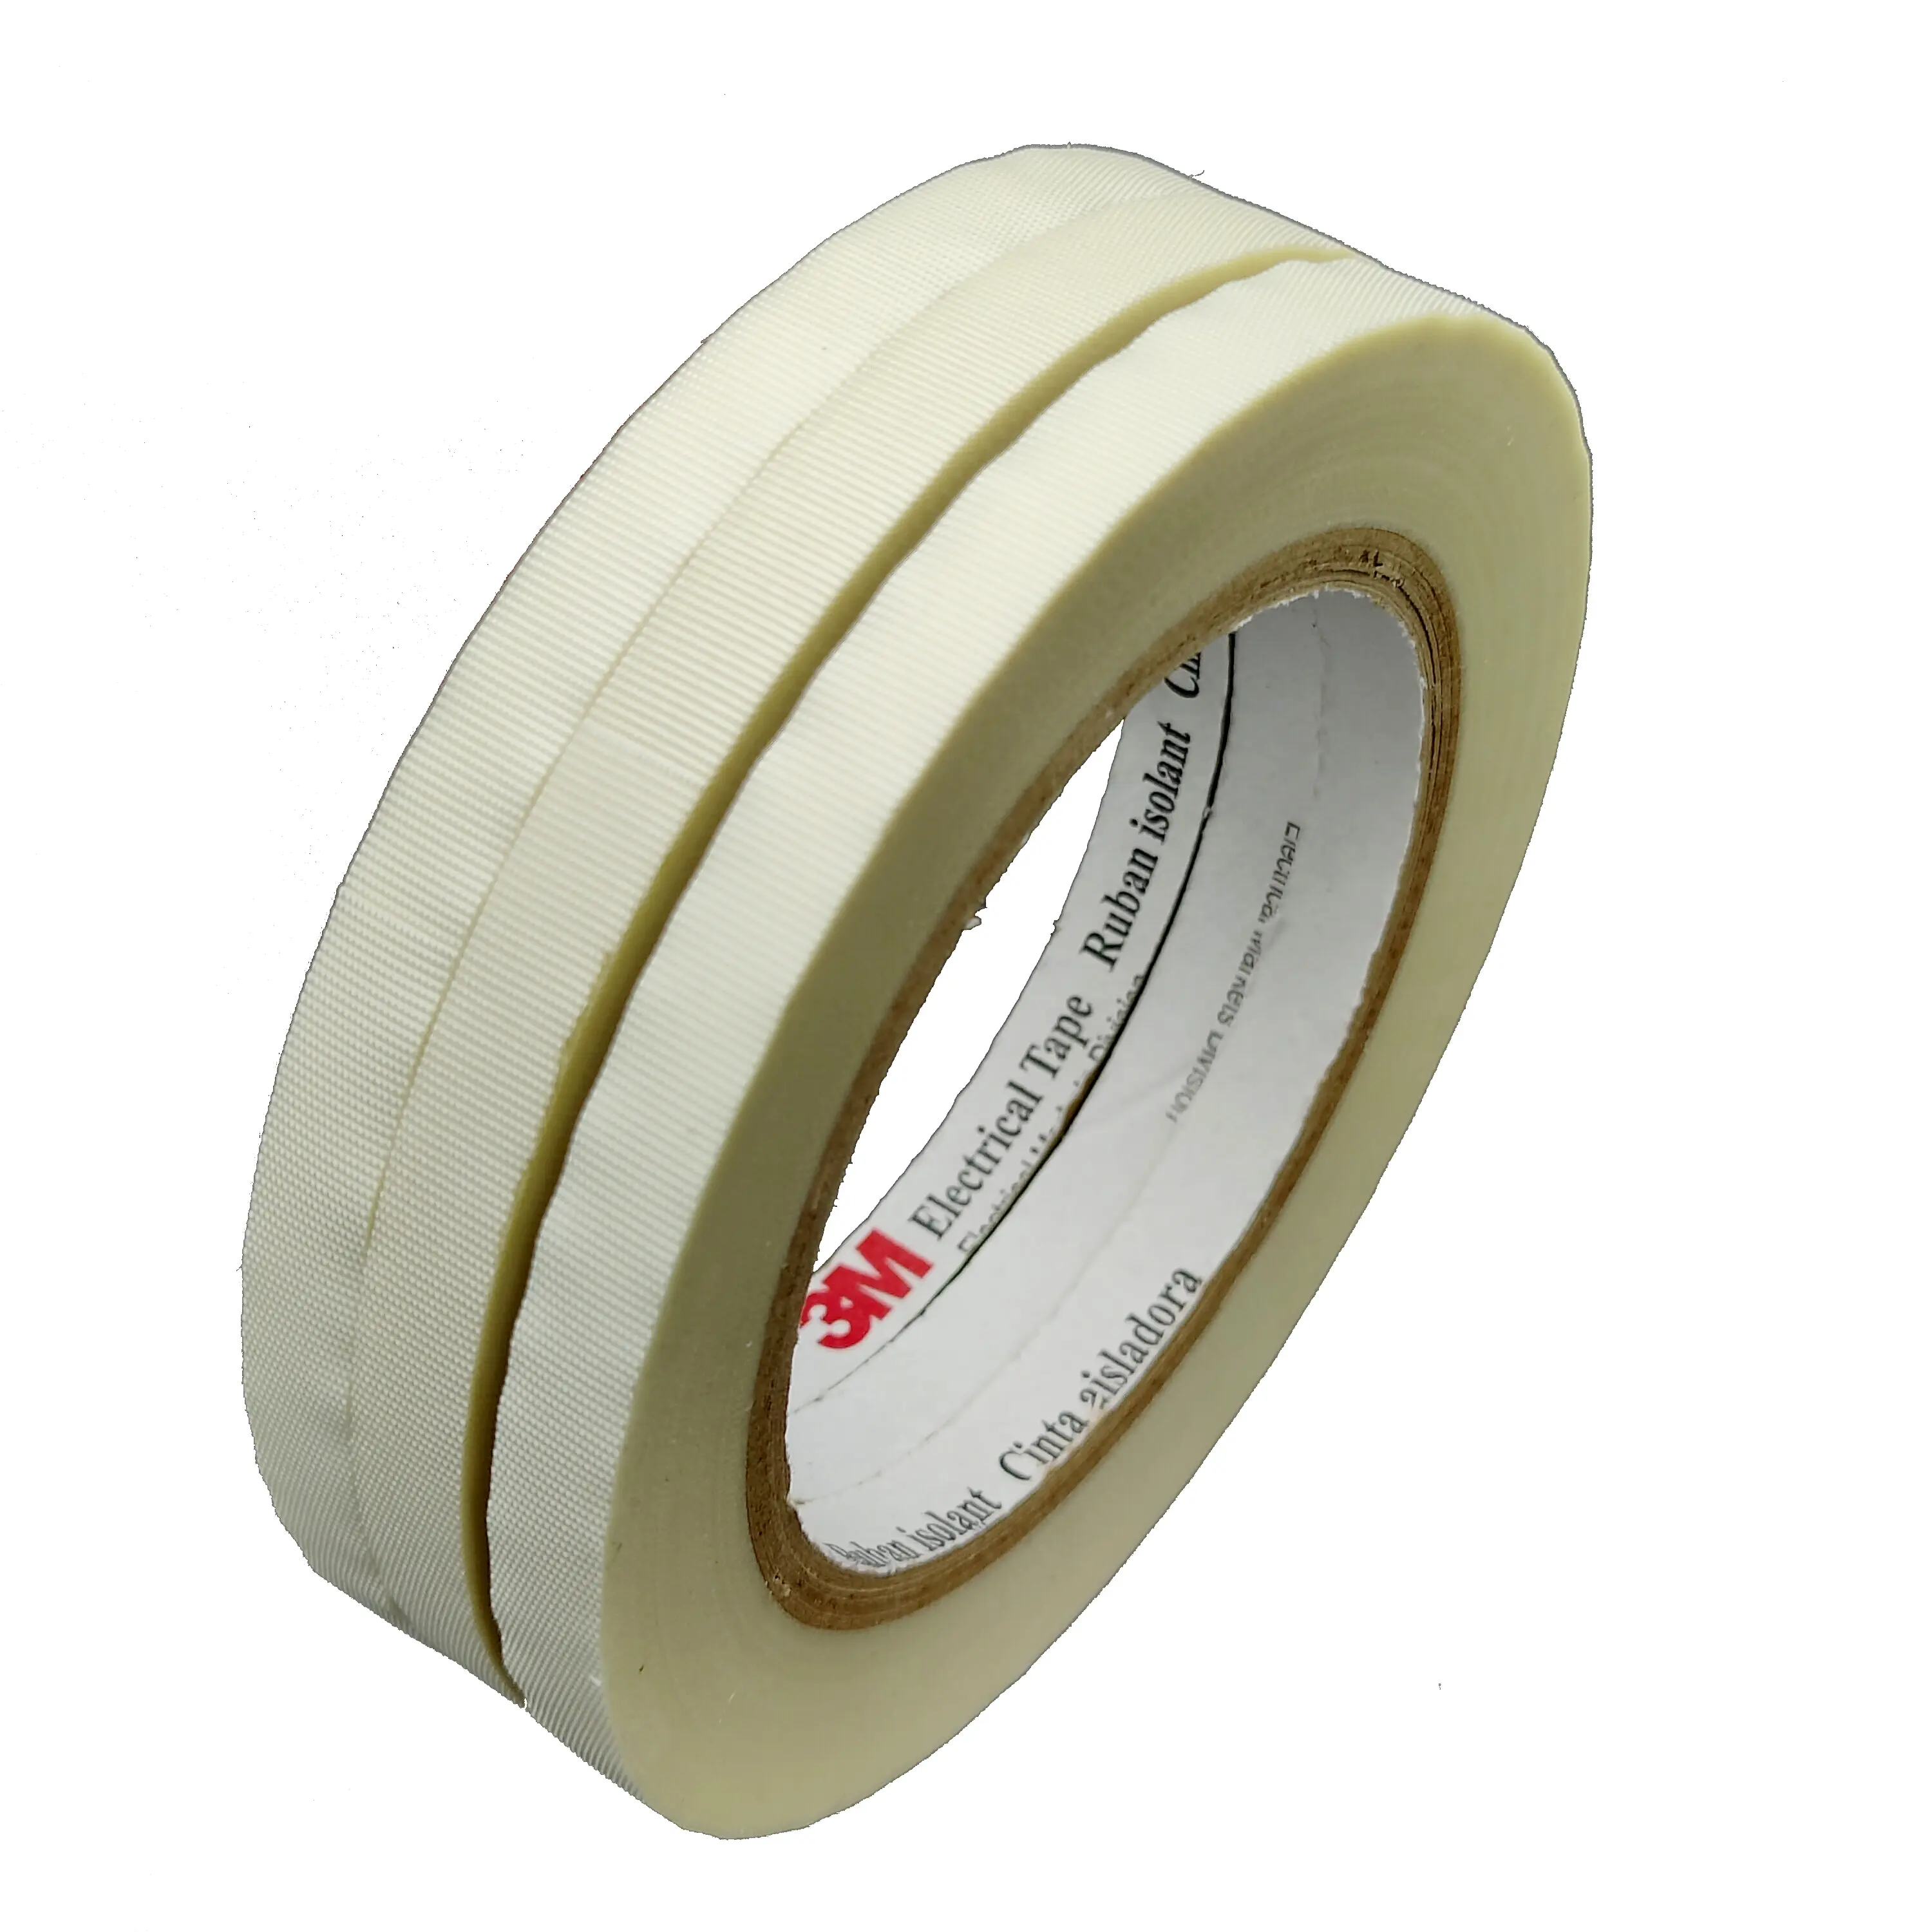 3M 69 Paper Masking Tape For Automotive Electronics Low tack rubber adhesive provides a quick Crepe paper